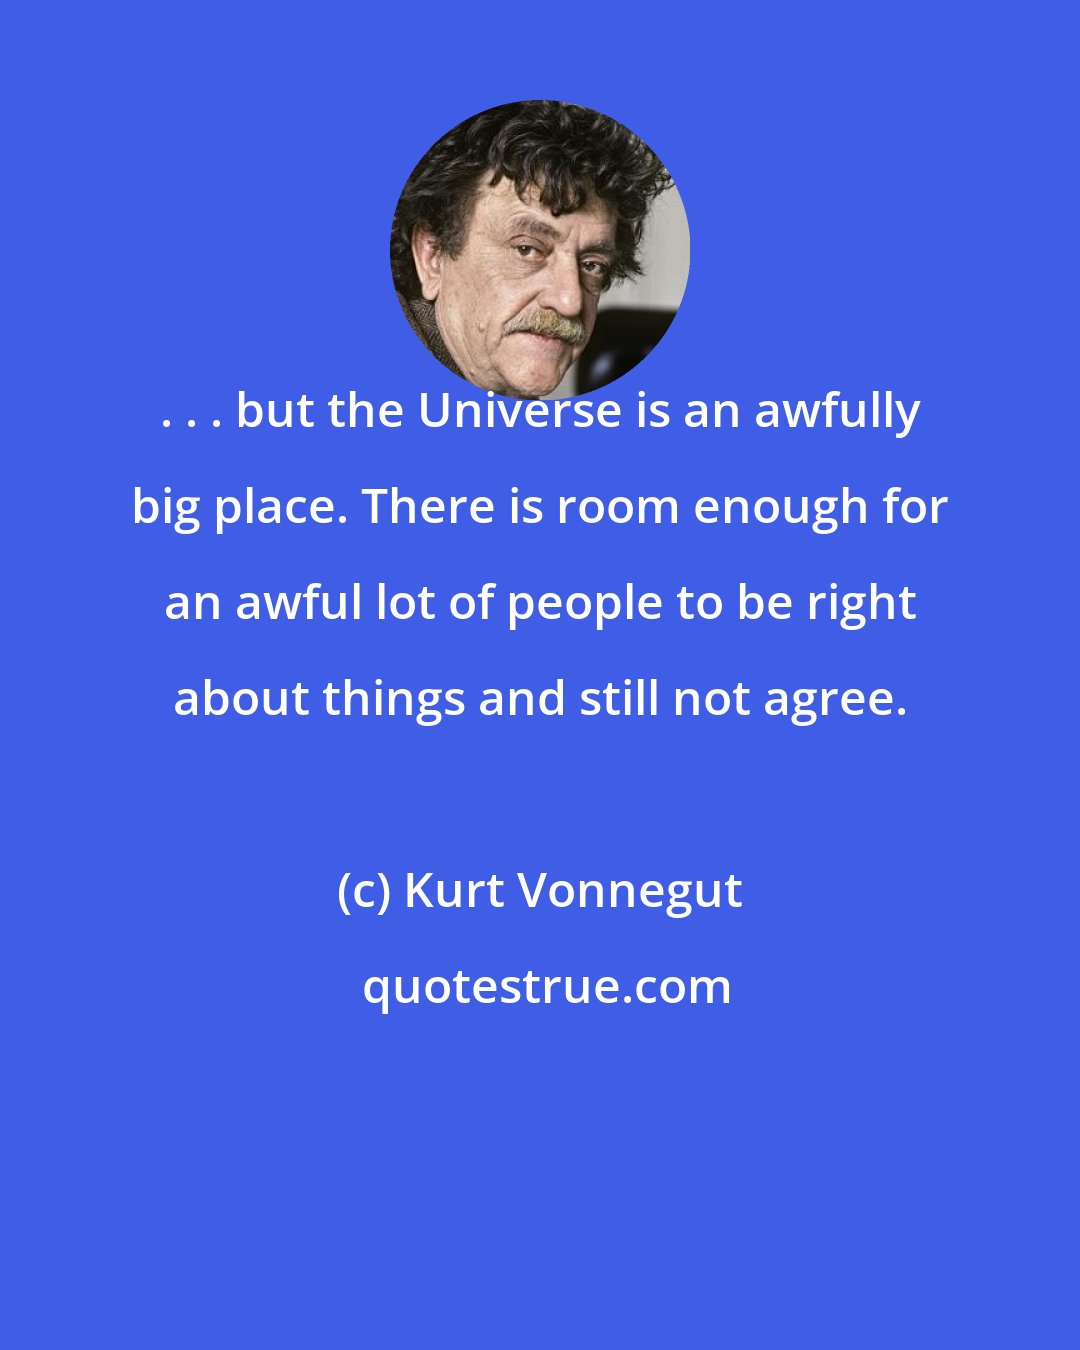 Kurt Vonnegut: . . . but the Universe is an awfully big place. There is room enough for an awful lot of people to be right about things and still not agree.